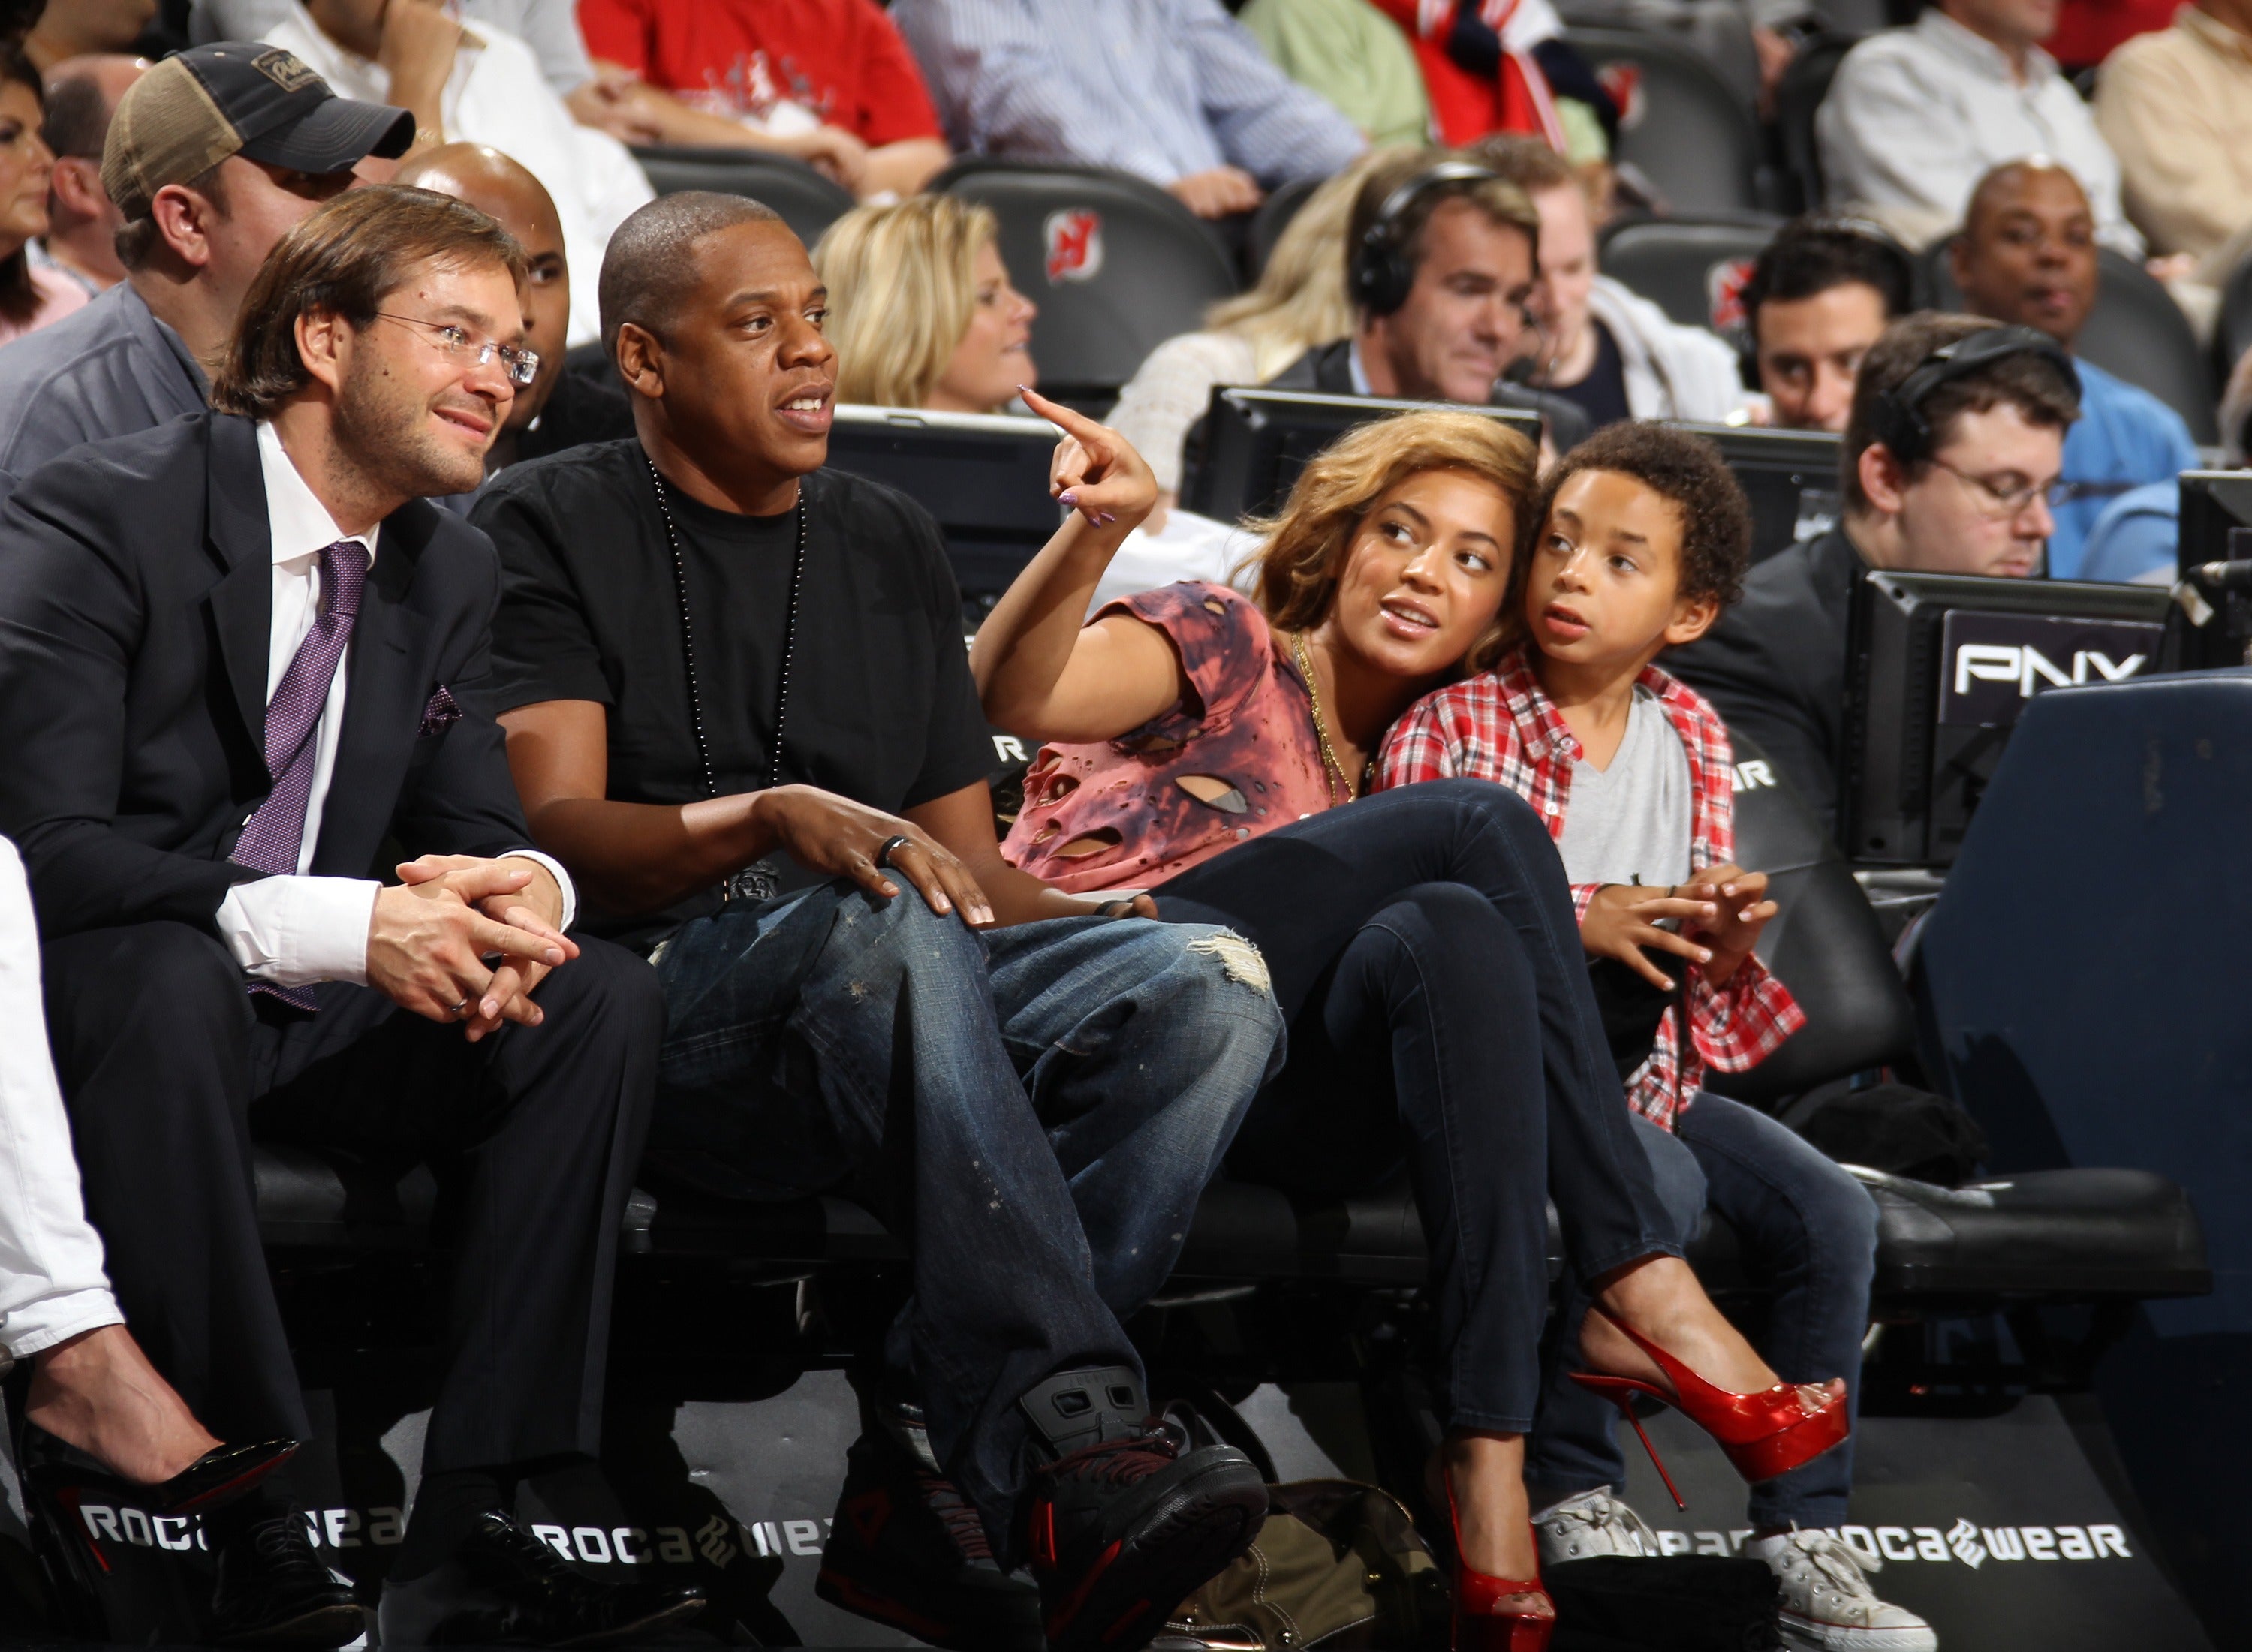 Best Photos Of Beyonce and Jay-Z Courtside at NBA Games Over The Years - Essence3000 x 2201